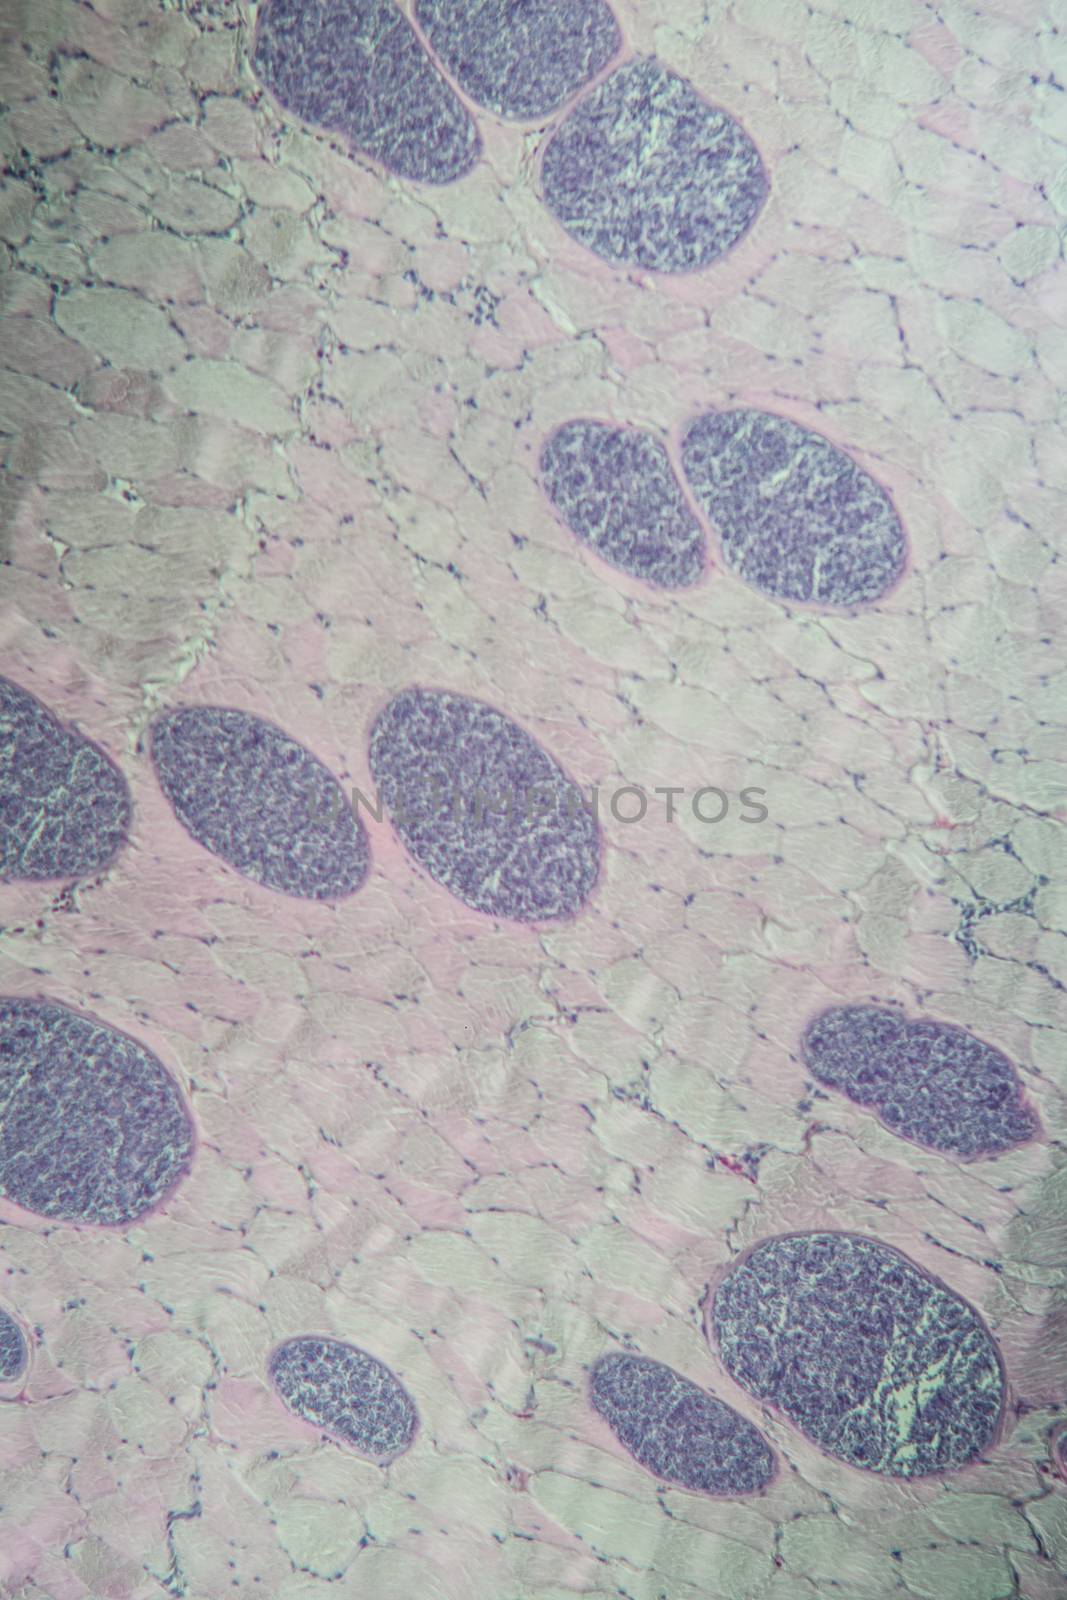 Sarcocystis spore animals in muscle, 100x